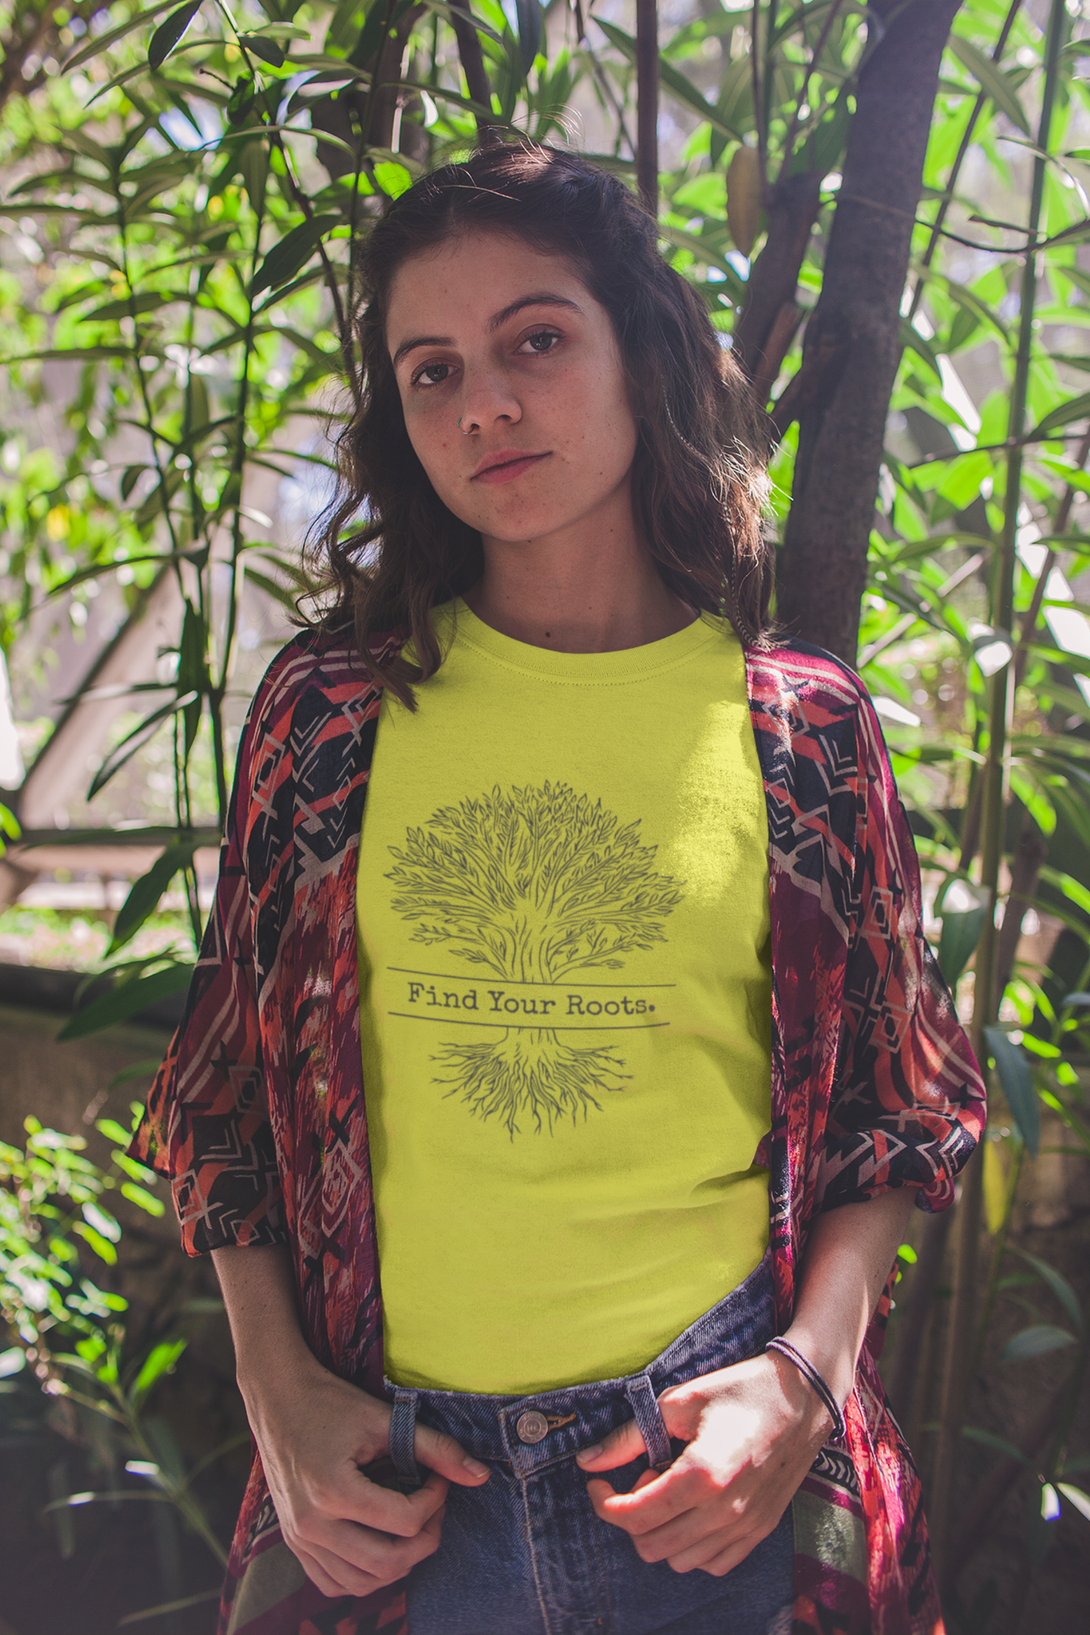 Find Your Roots Printed T-Shirt For Women - WowWaves - 10